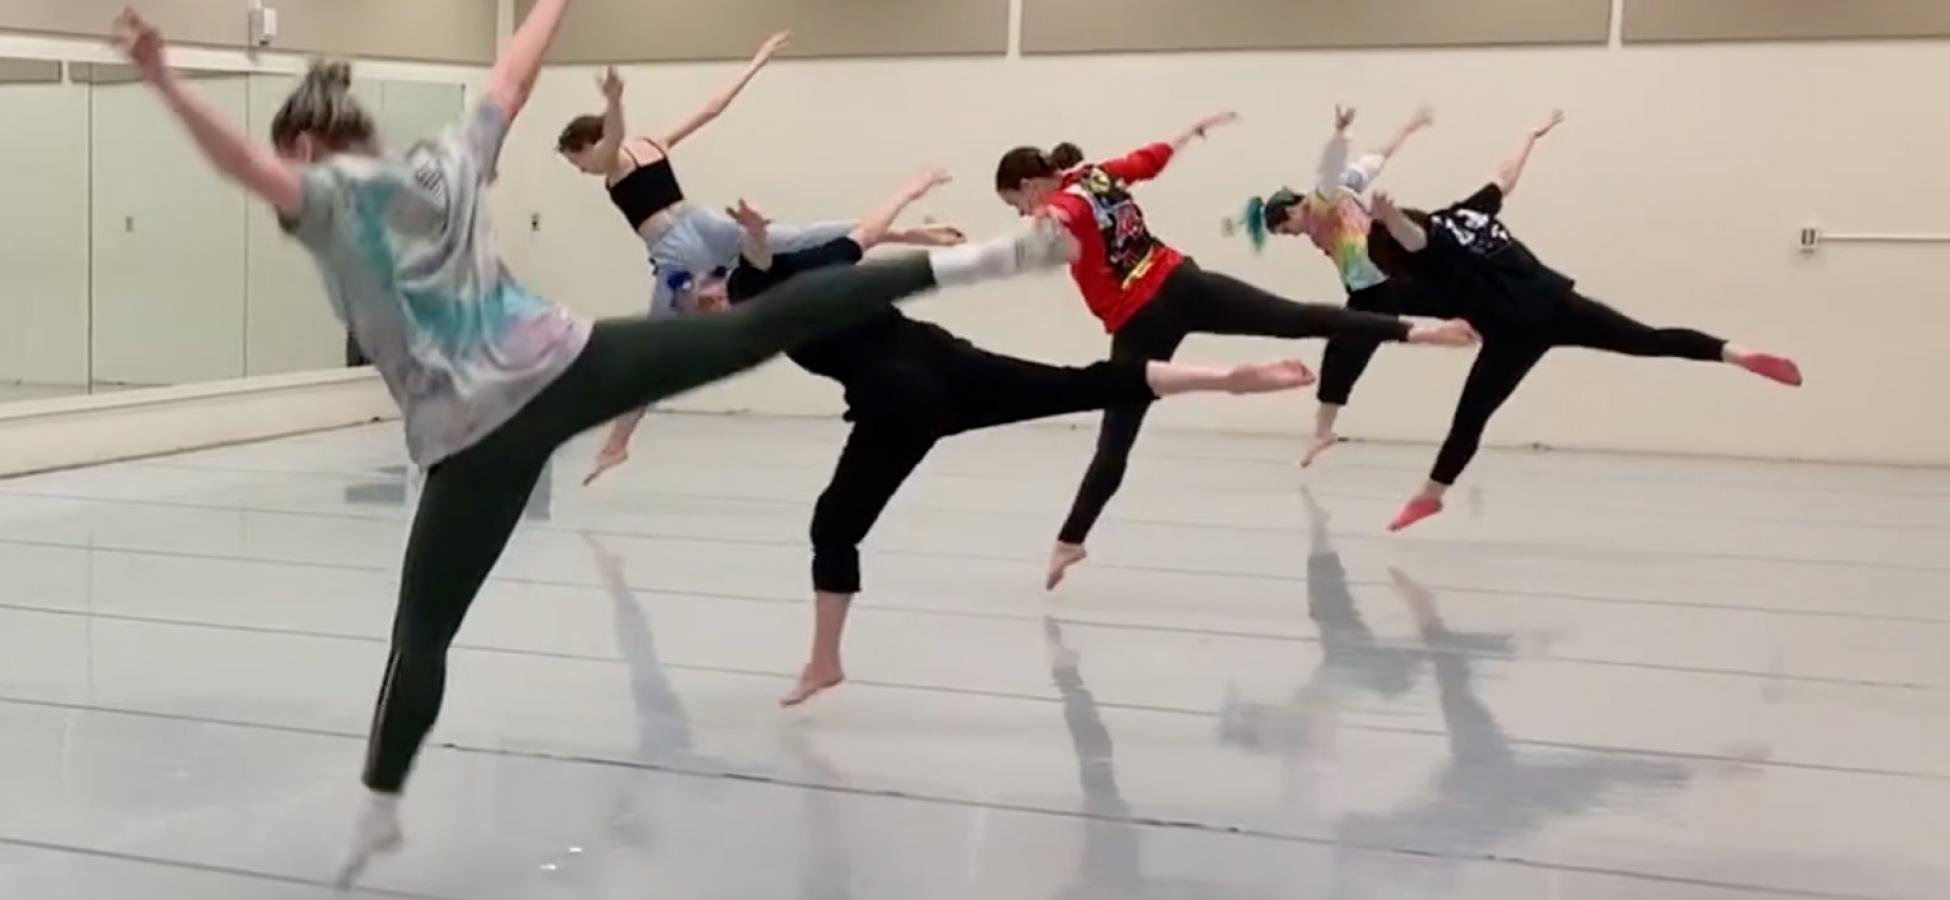 four dancers in a line, back legs extended, leaping forward away from the viewer